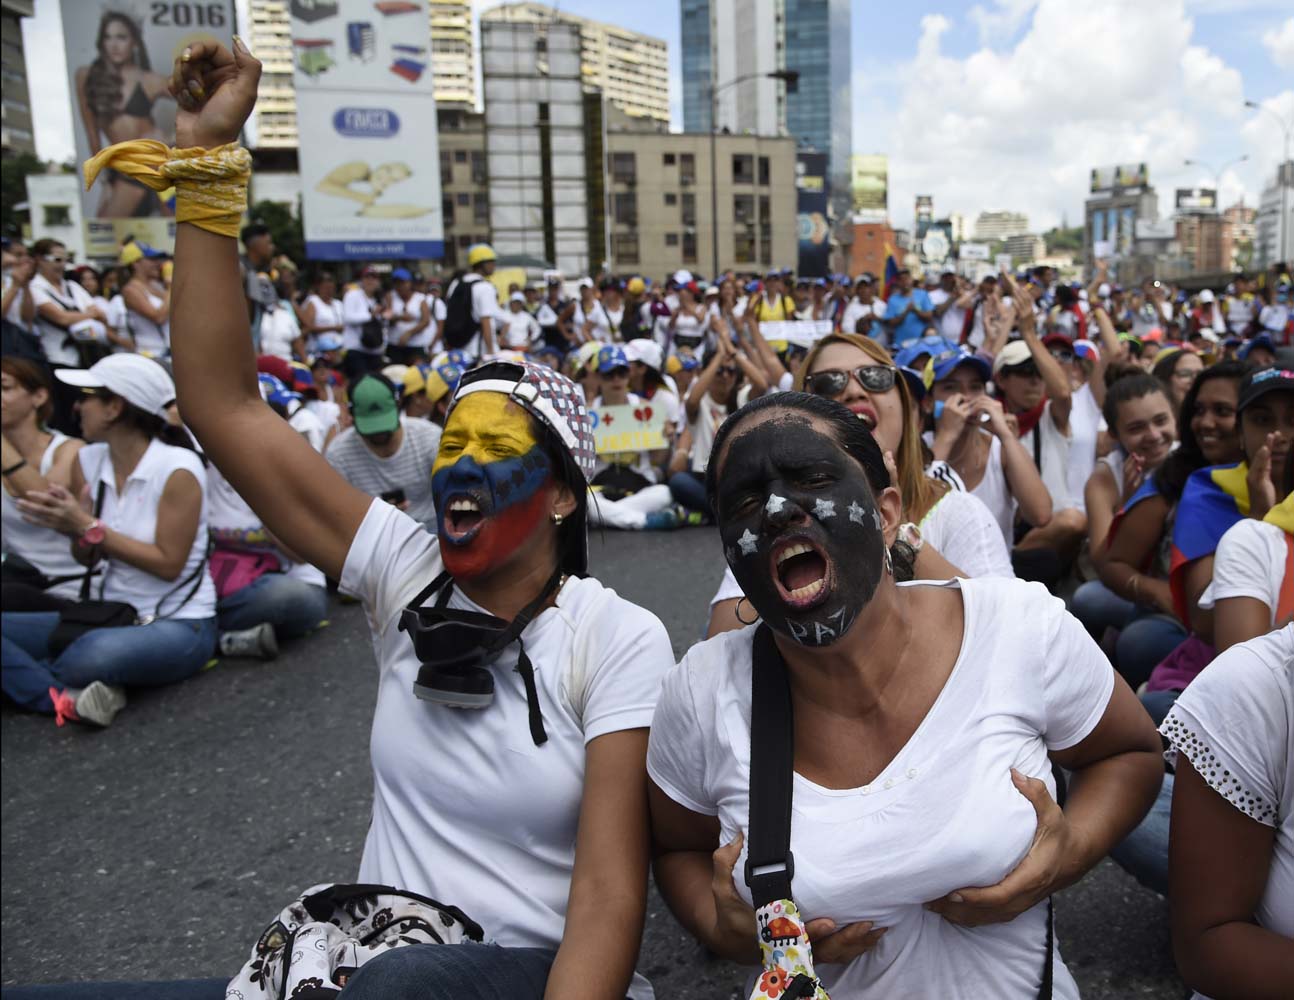 Venezuelan opposition activists take part in a women's march aimed to keep pressure on President Nicolas Maduro, whose authority is being increasingly challenged by protests and deadly unrest, in Caracas on May 6, 2017. The death toll since April, when the protests intensified after Maduro's administration and the courts stepped up efforts to undermine the opposition, is at least 36 according to prosecutors. / AFP PHOTO / JUAN BARRETO